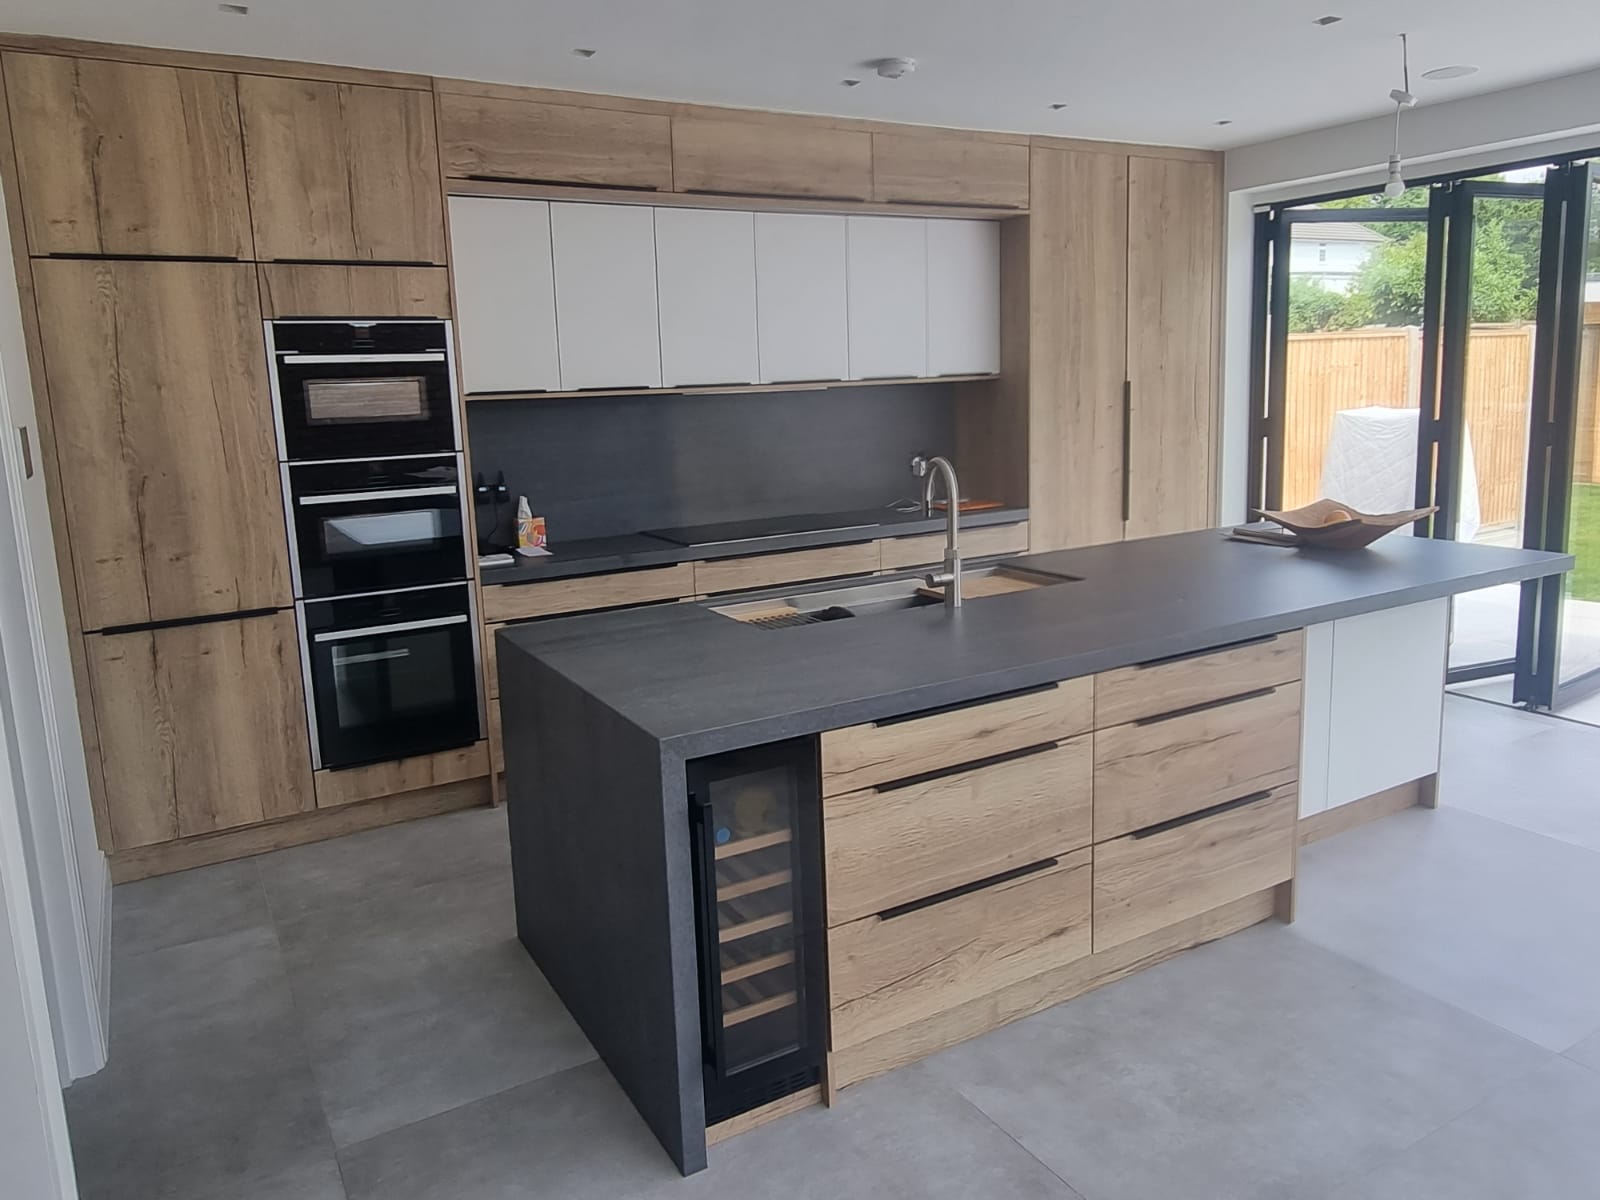 Bespoke kitchen in Mansfield with custom cabinetry, a statement island, and modern pendant lighting